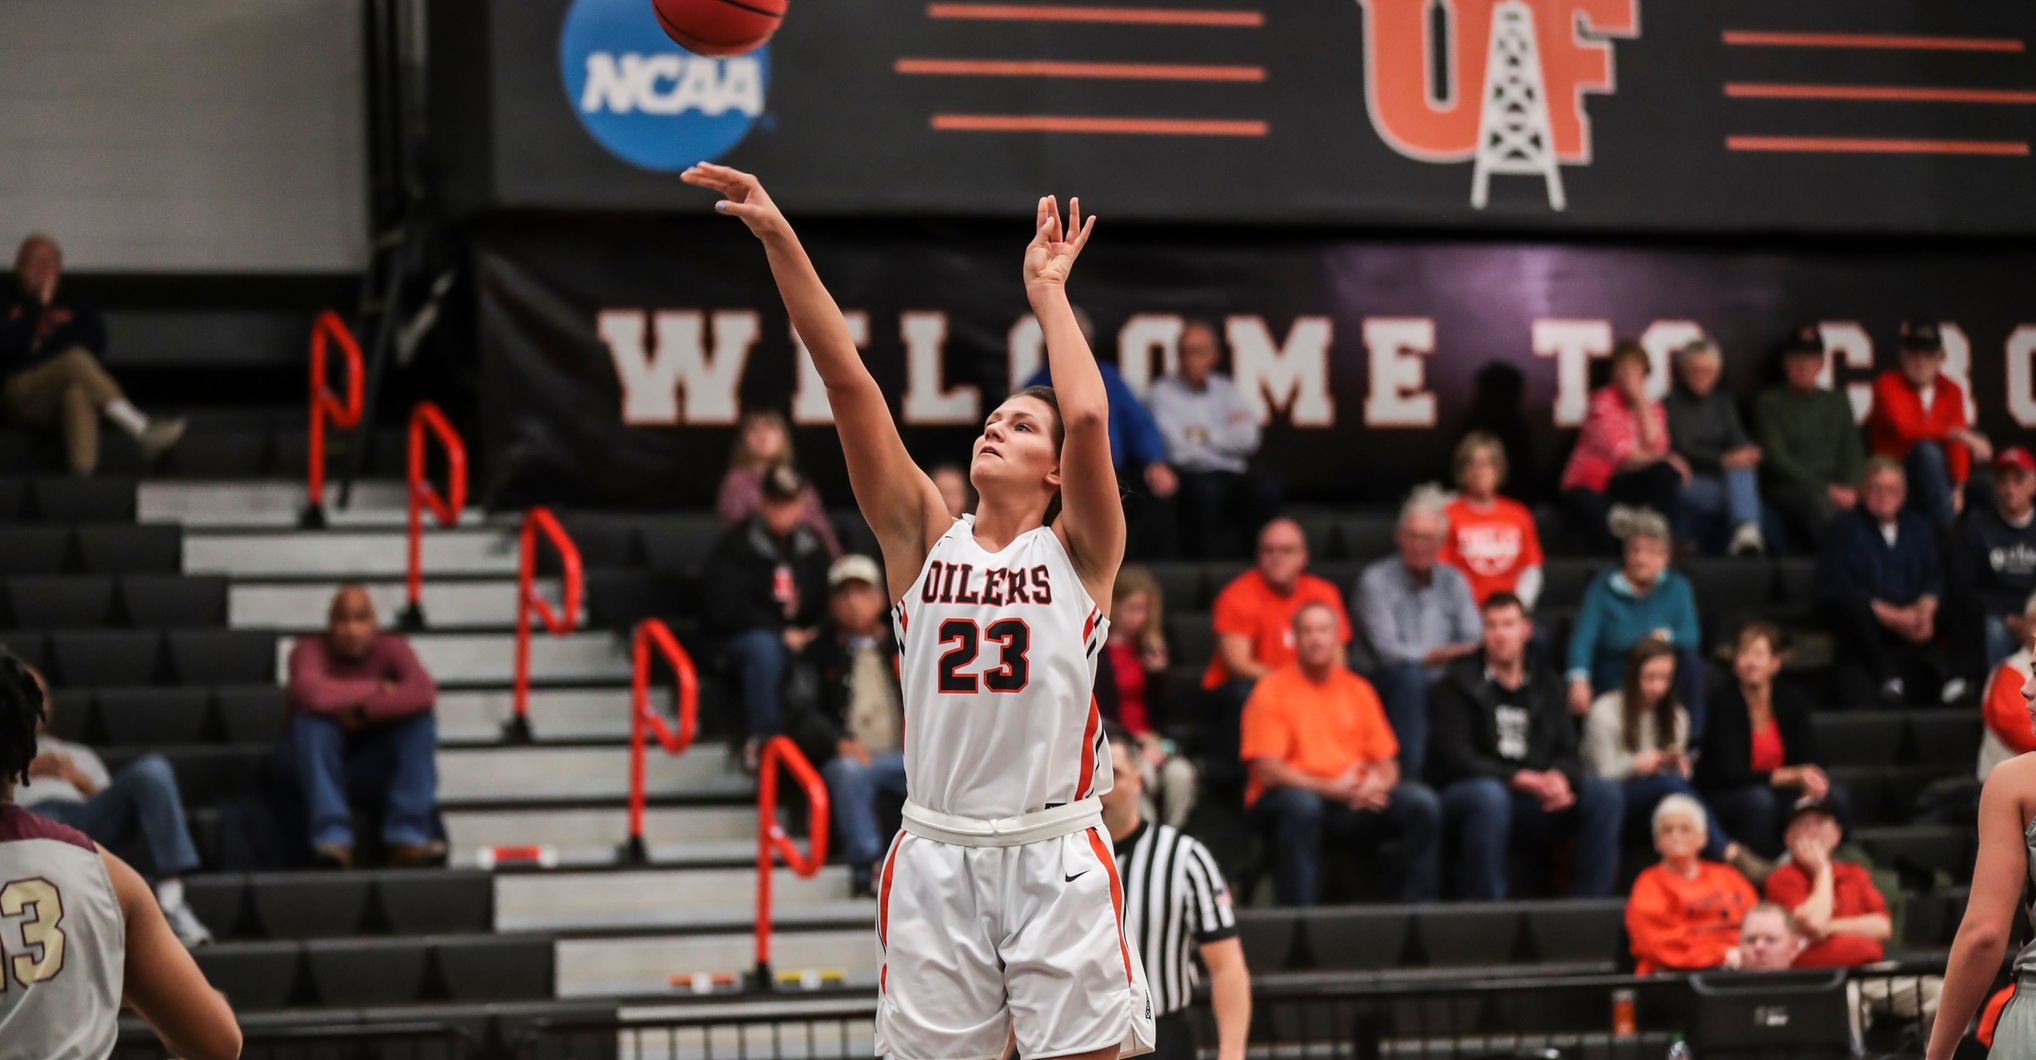 Oilers Drop Road Contest at Hillsdale